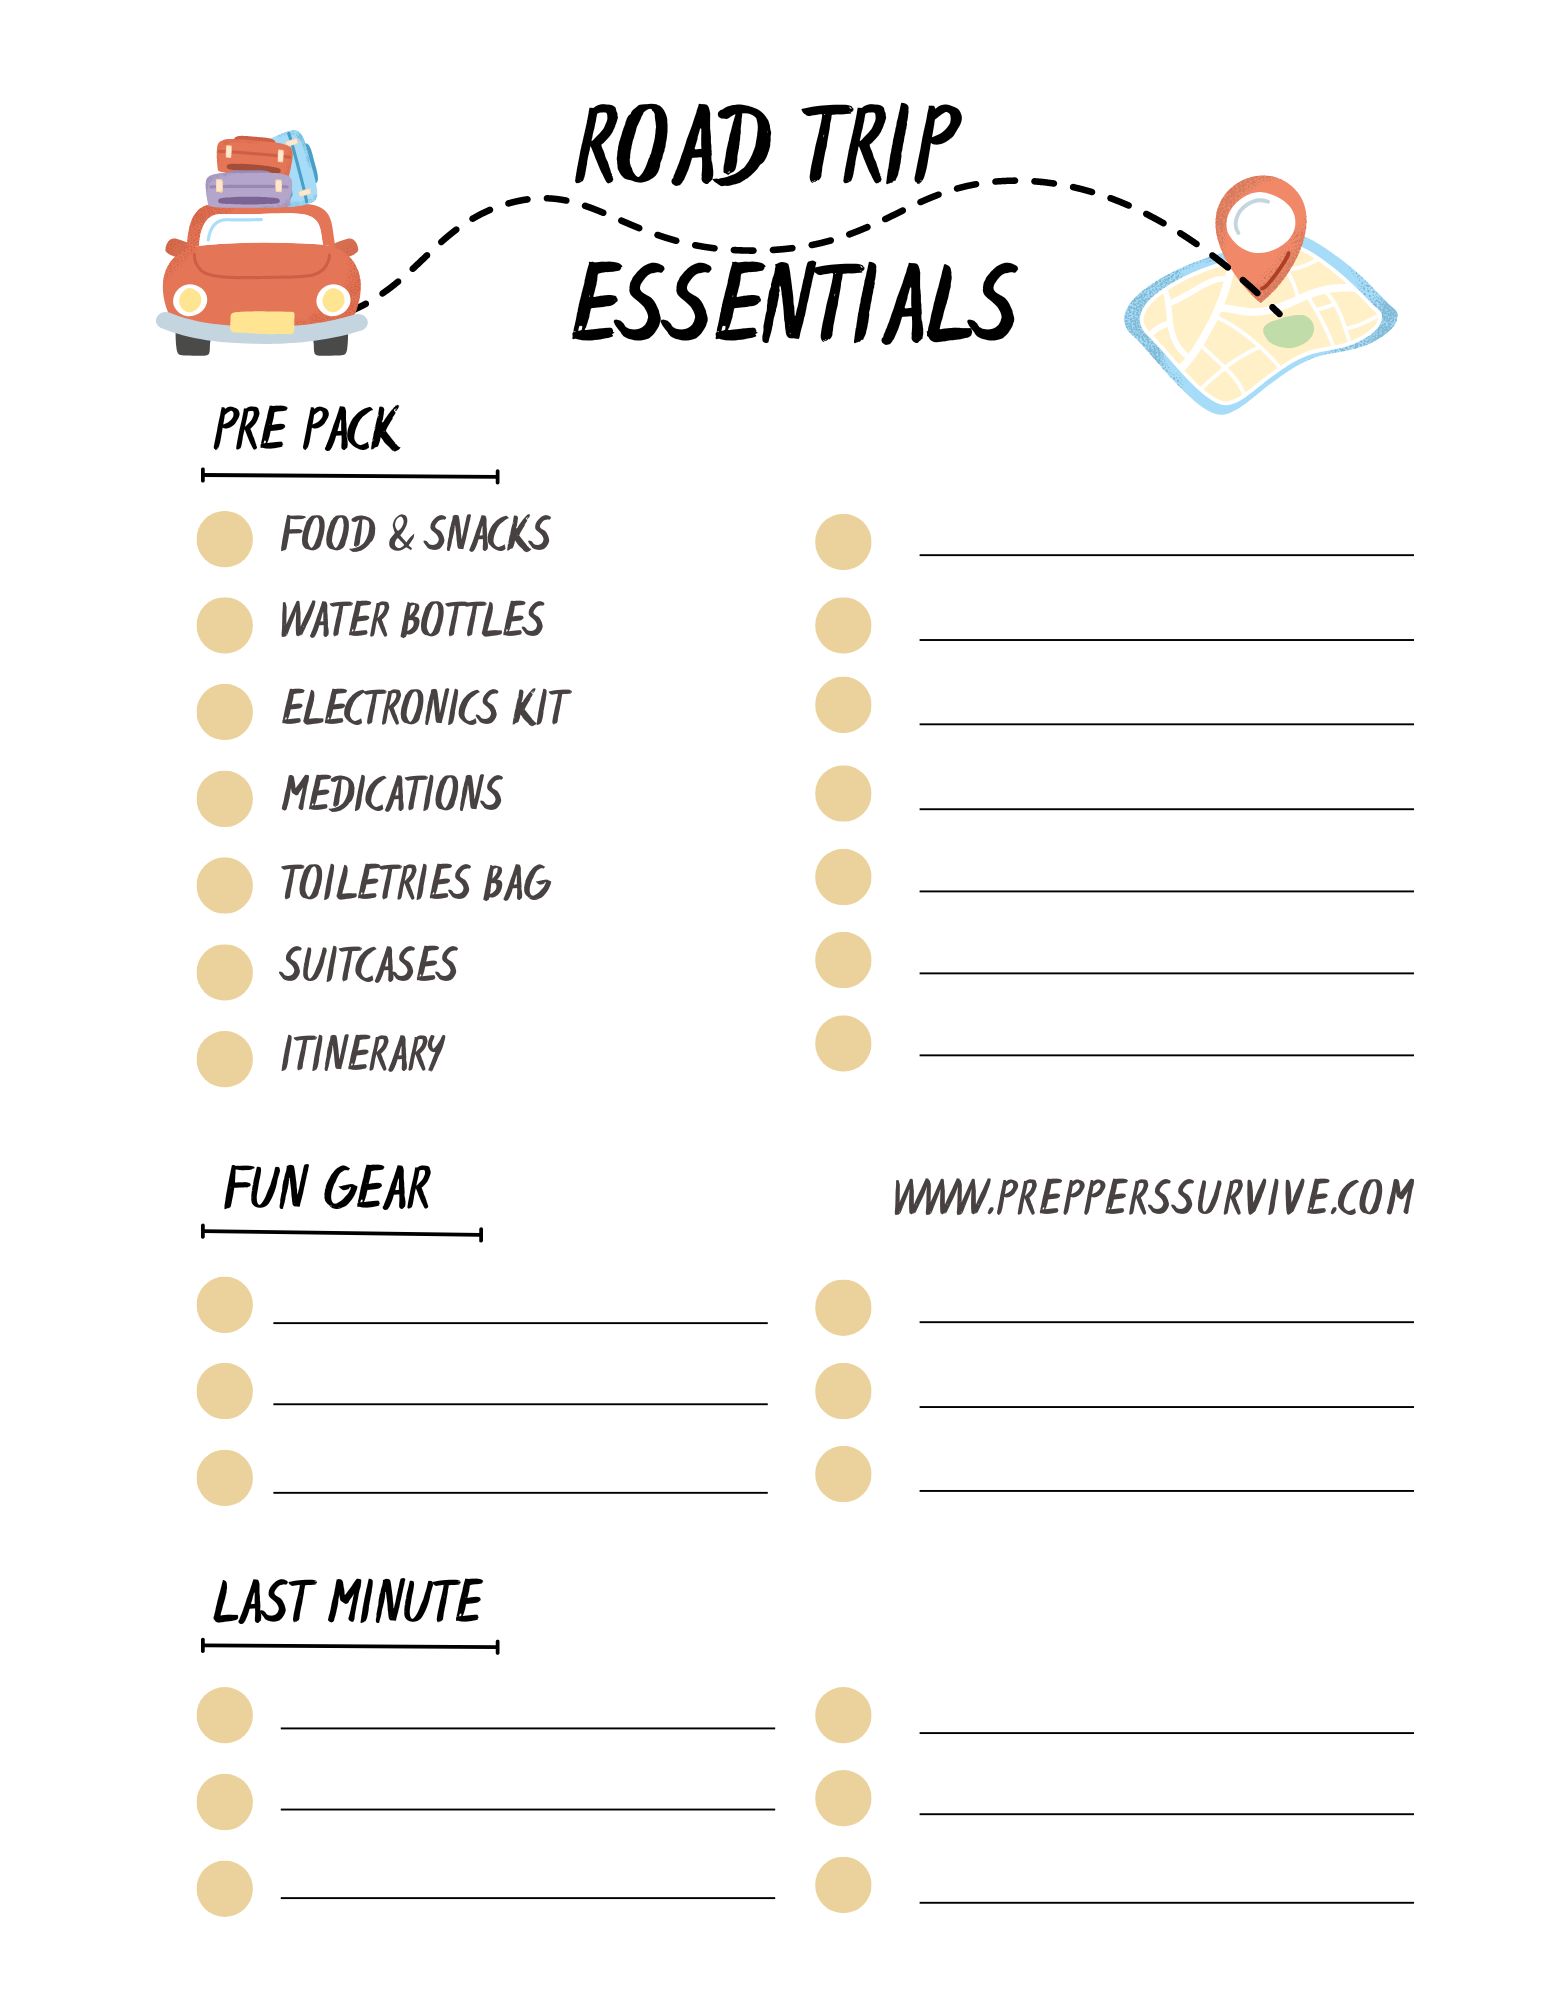 38 Helpful Items You Must Have on a Family Road Trip Checklist - Road Trip  Wanderers